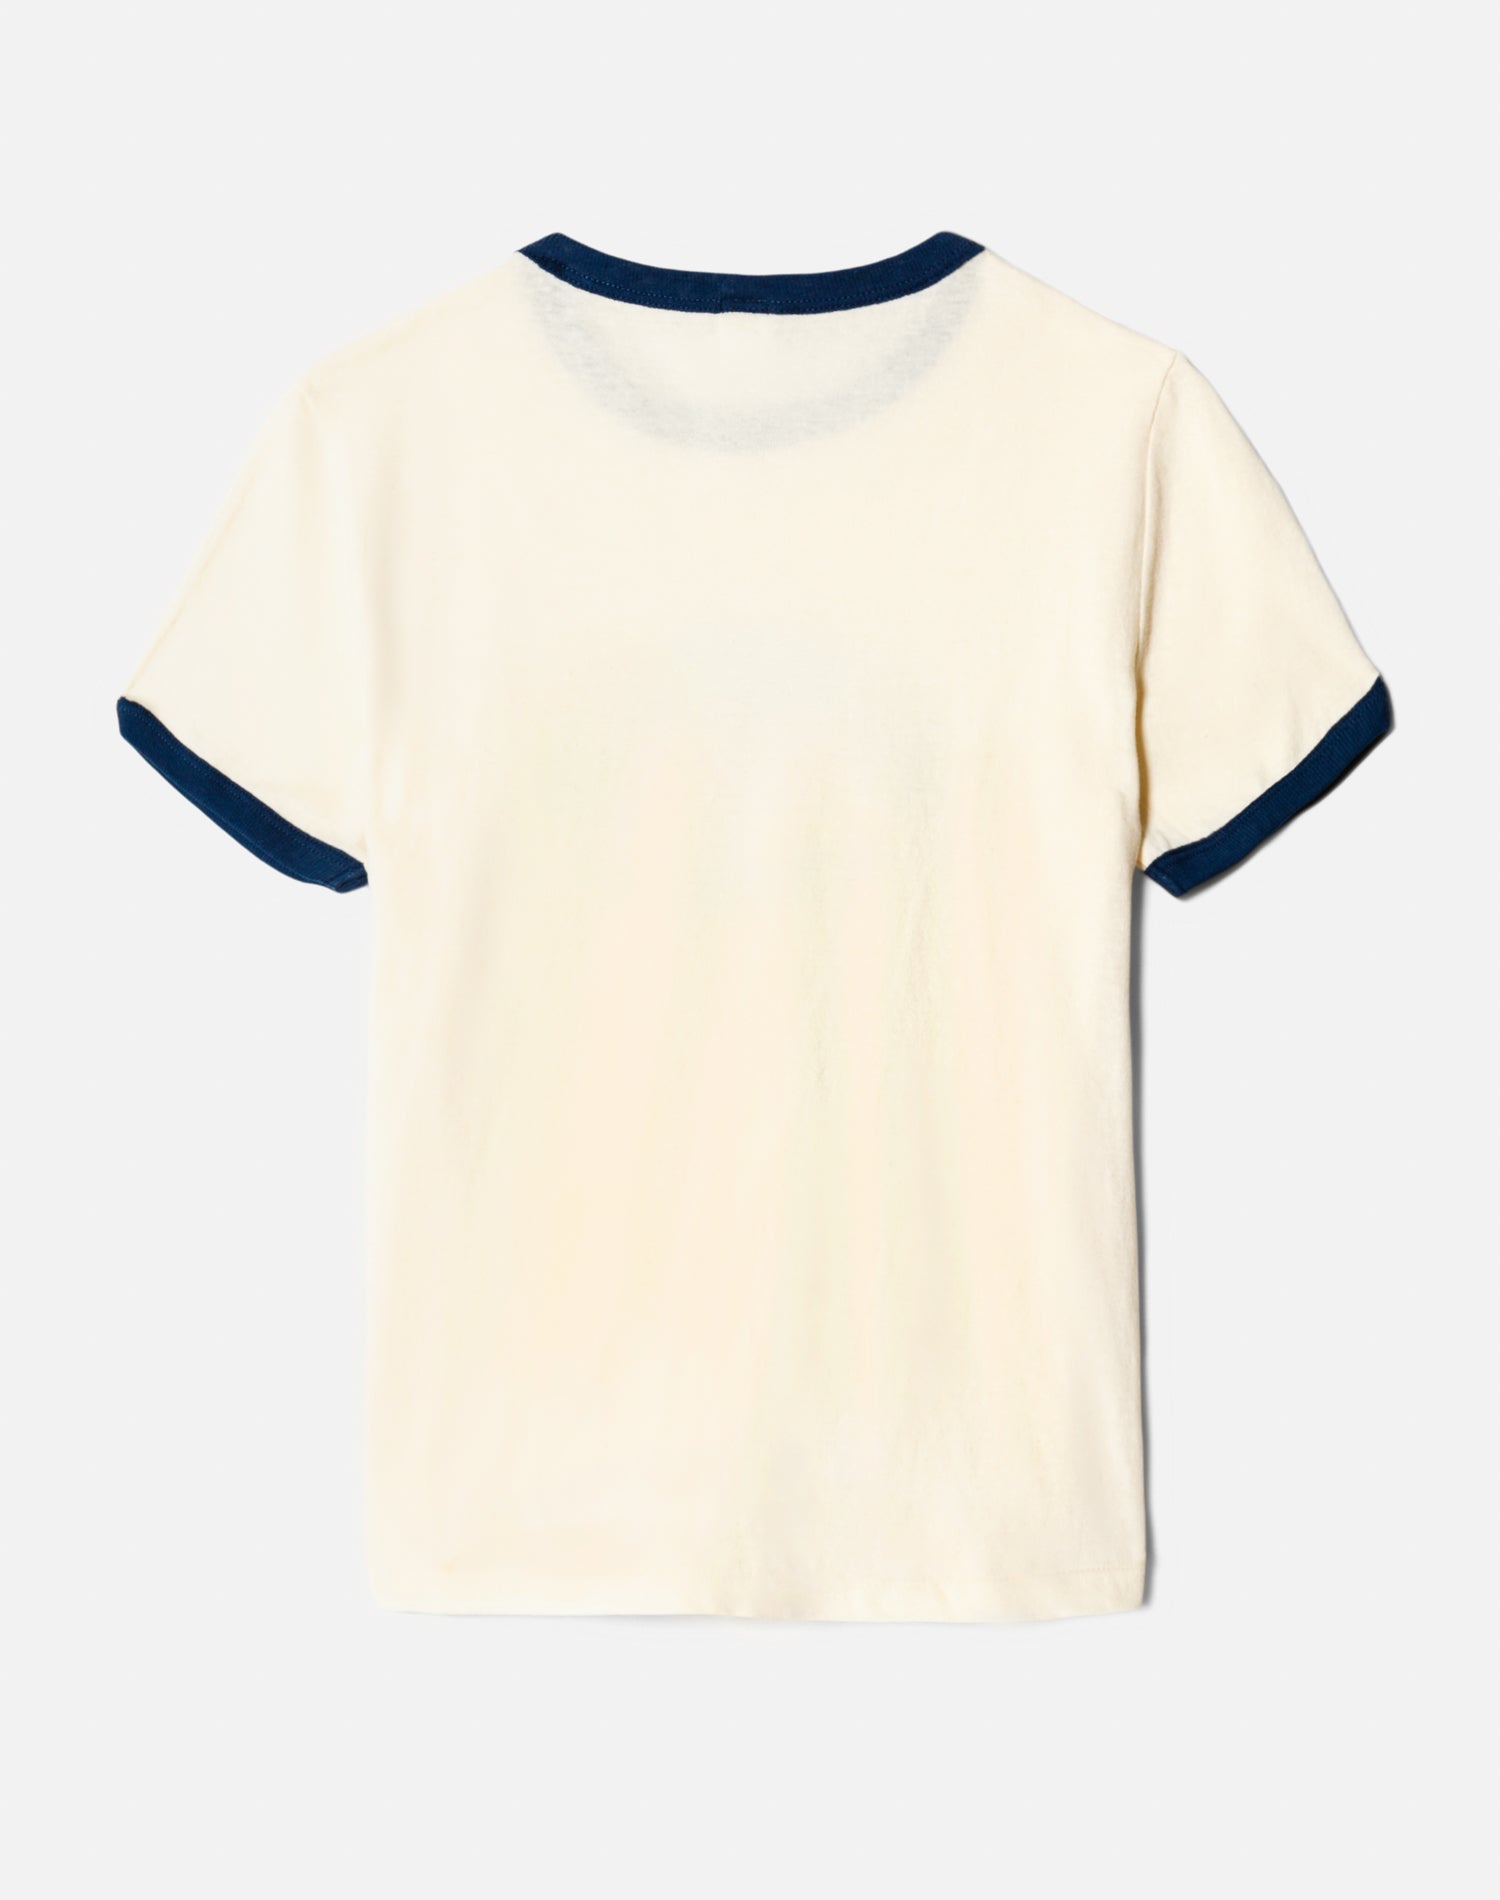 Ringer "Dirty Shirley" Tee - Vintage Ivory With Midnight